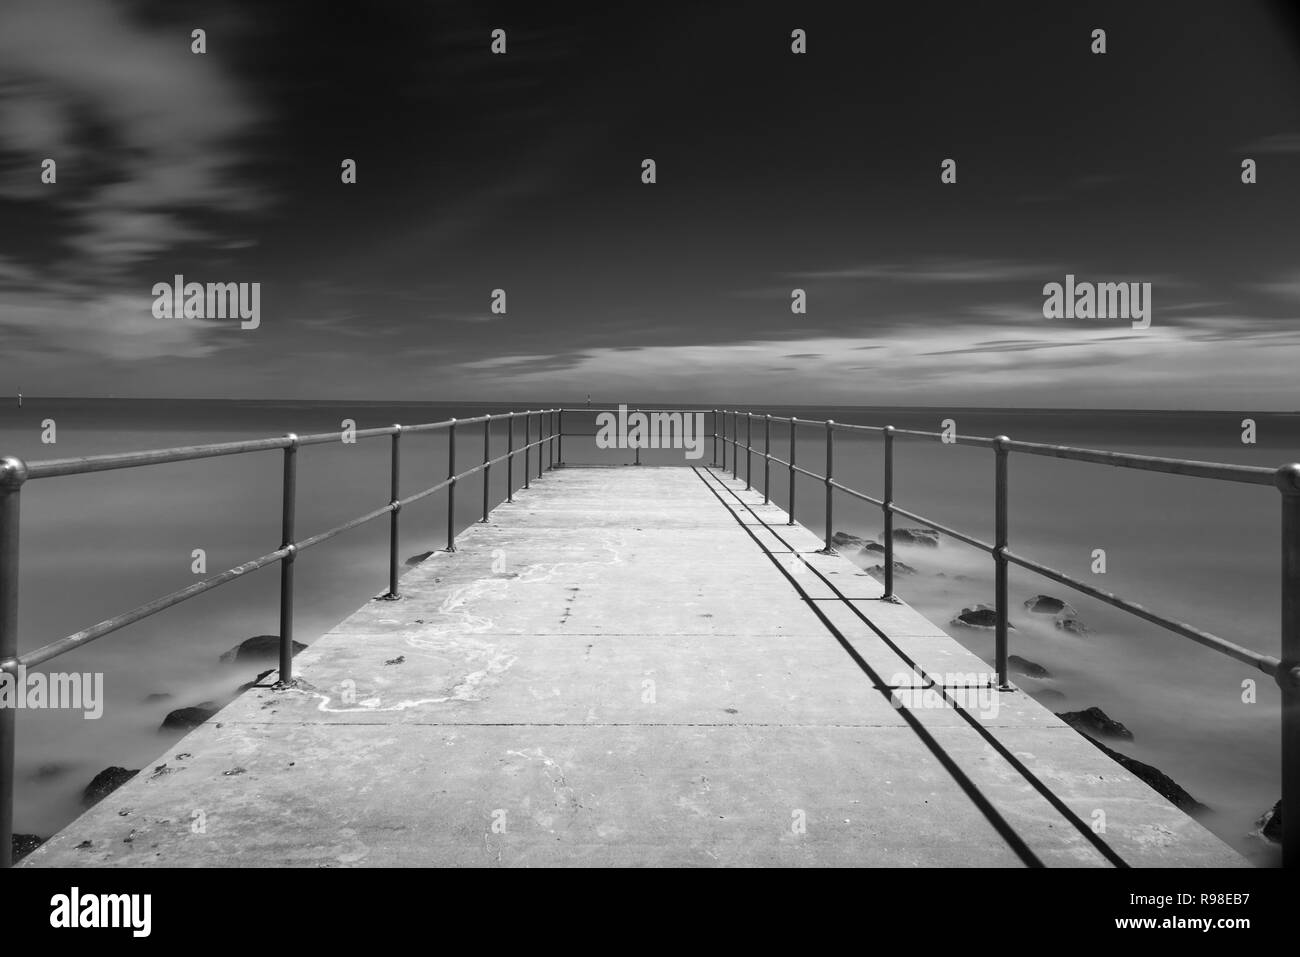 Jetty leading out into the bay, lit by moonlight, ling exposure at night, B&W Stock Photo